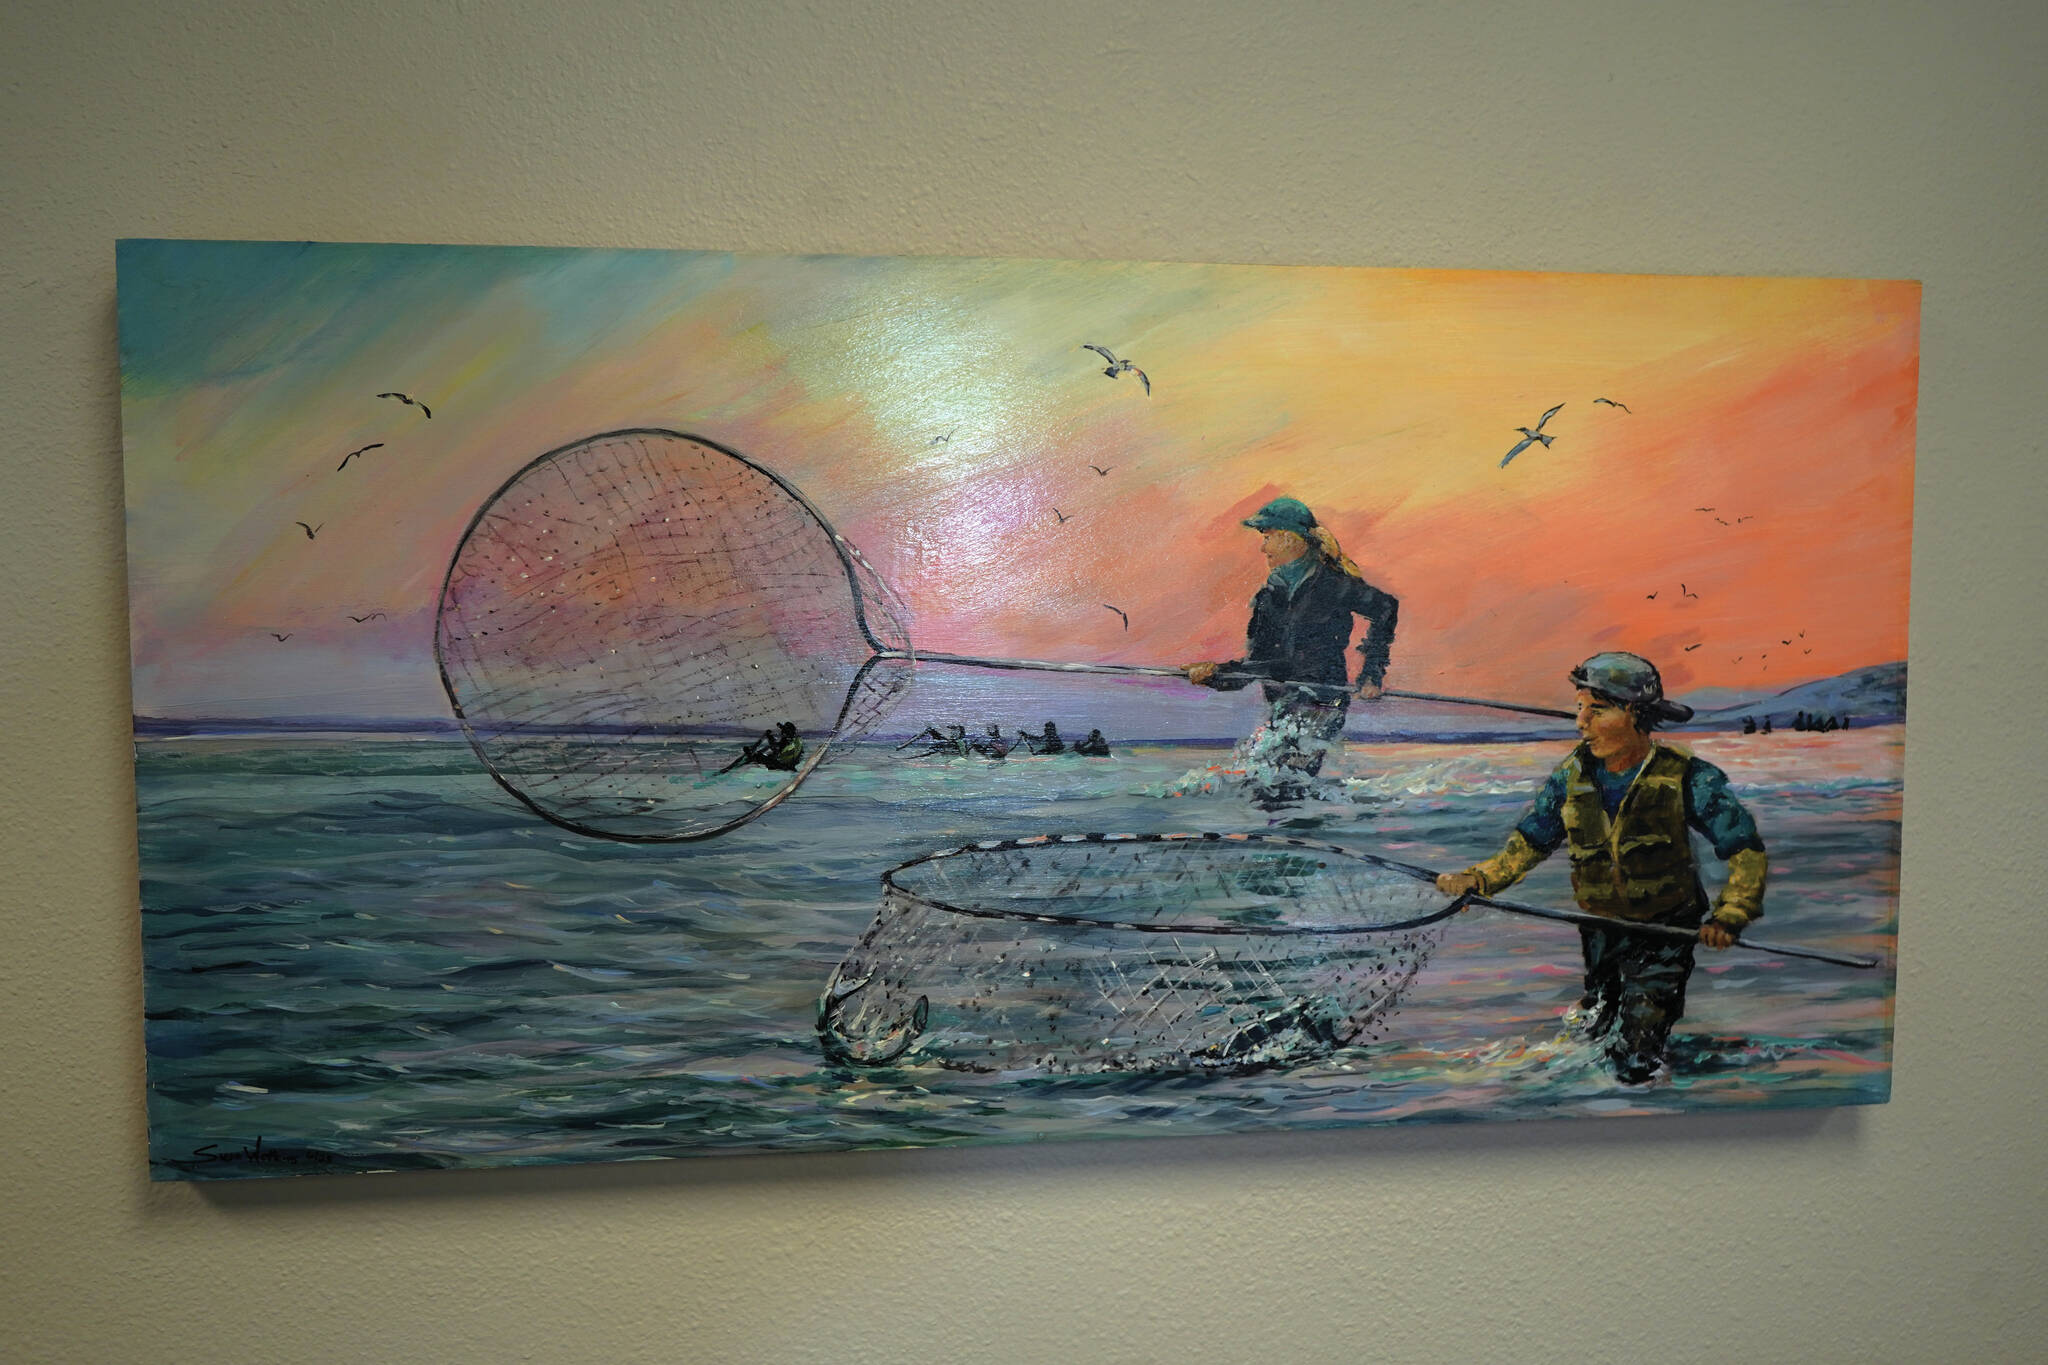 A painting by Susan Watkins hangs at the Kenai Art Center on Wednesday, as part of “Up Close and Far Away — My View,” the center’s August exhibit. (Jake Dye/Peninsula Clarion)